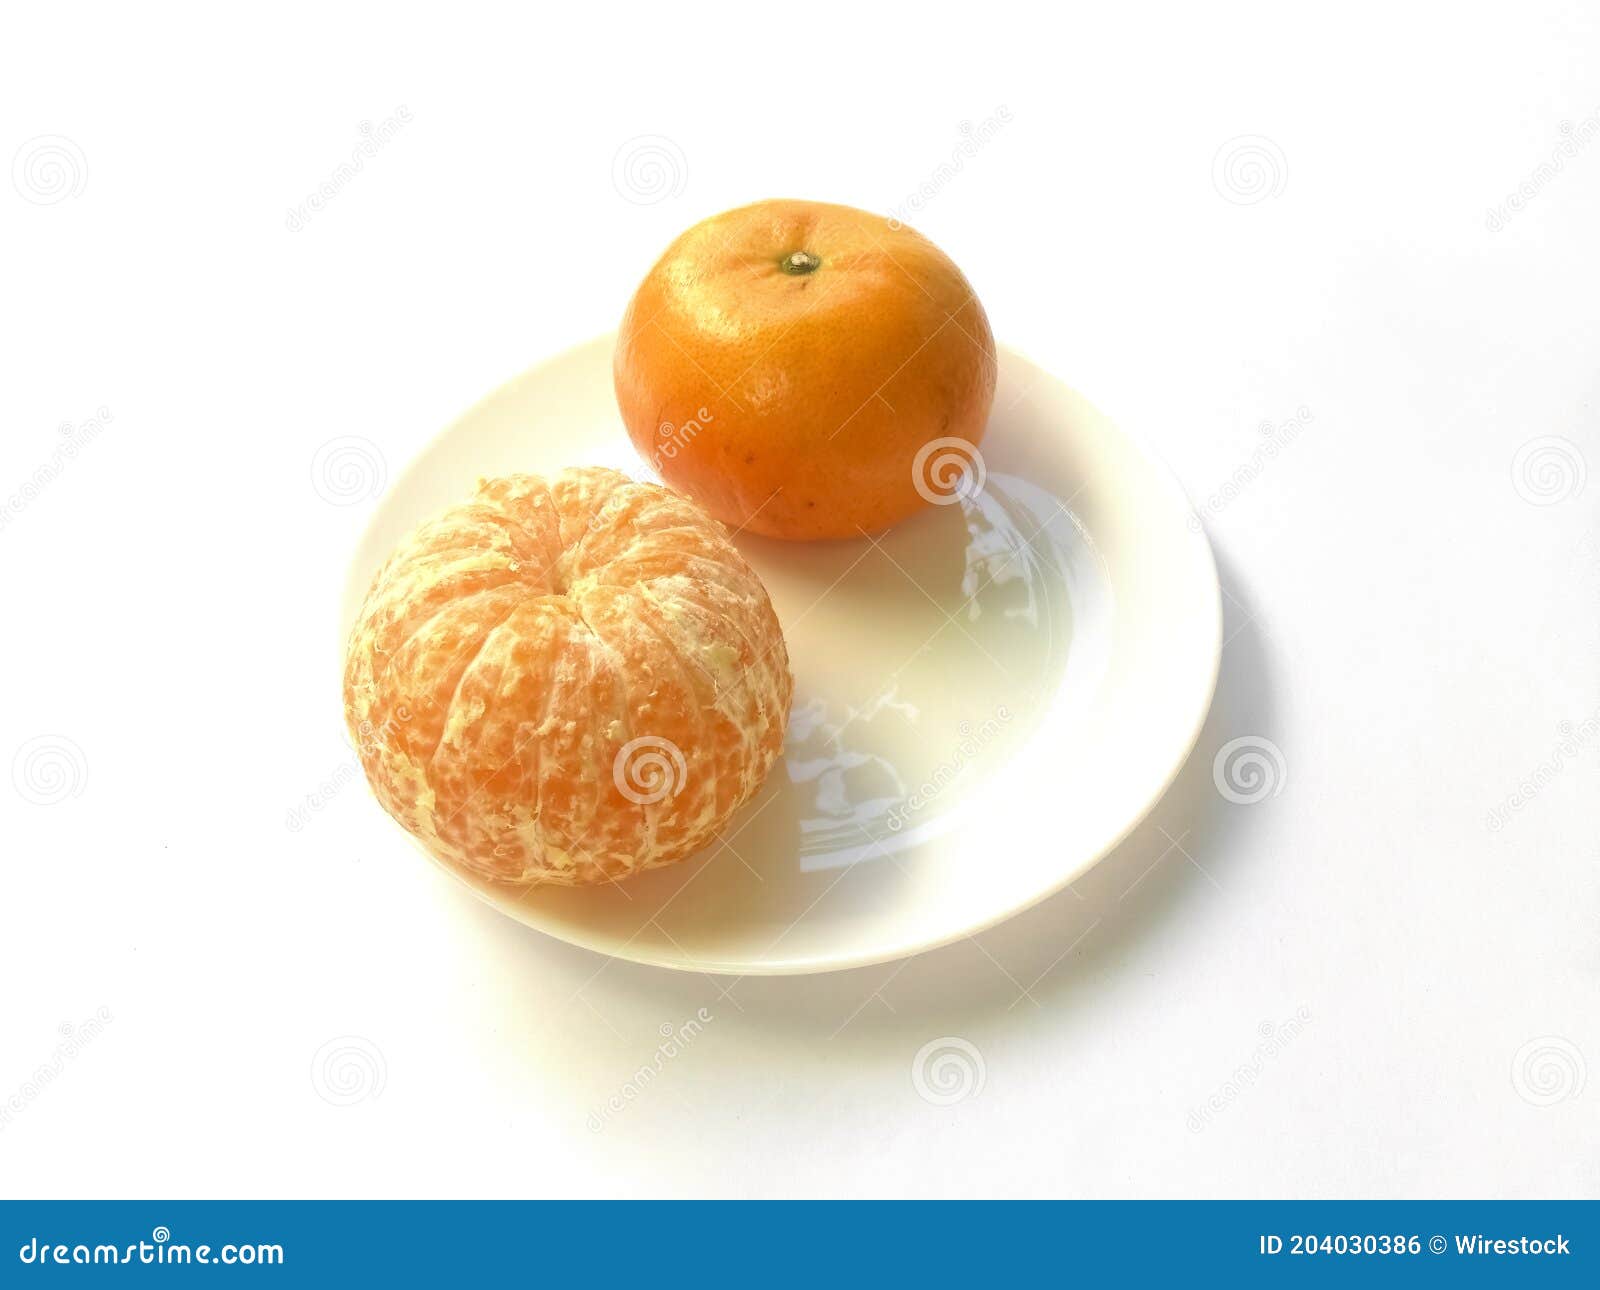 closeup of juicy ripe orange tangerines (citrus reticula) peeled on a plate with a white background